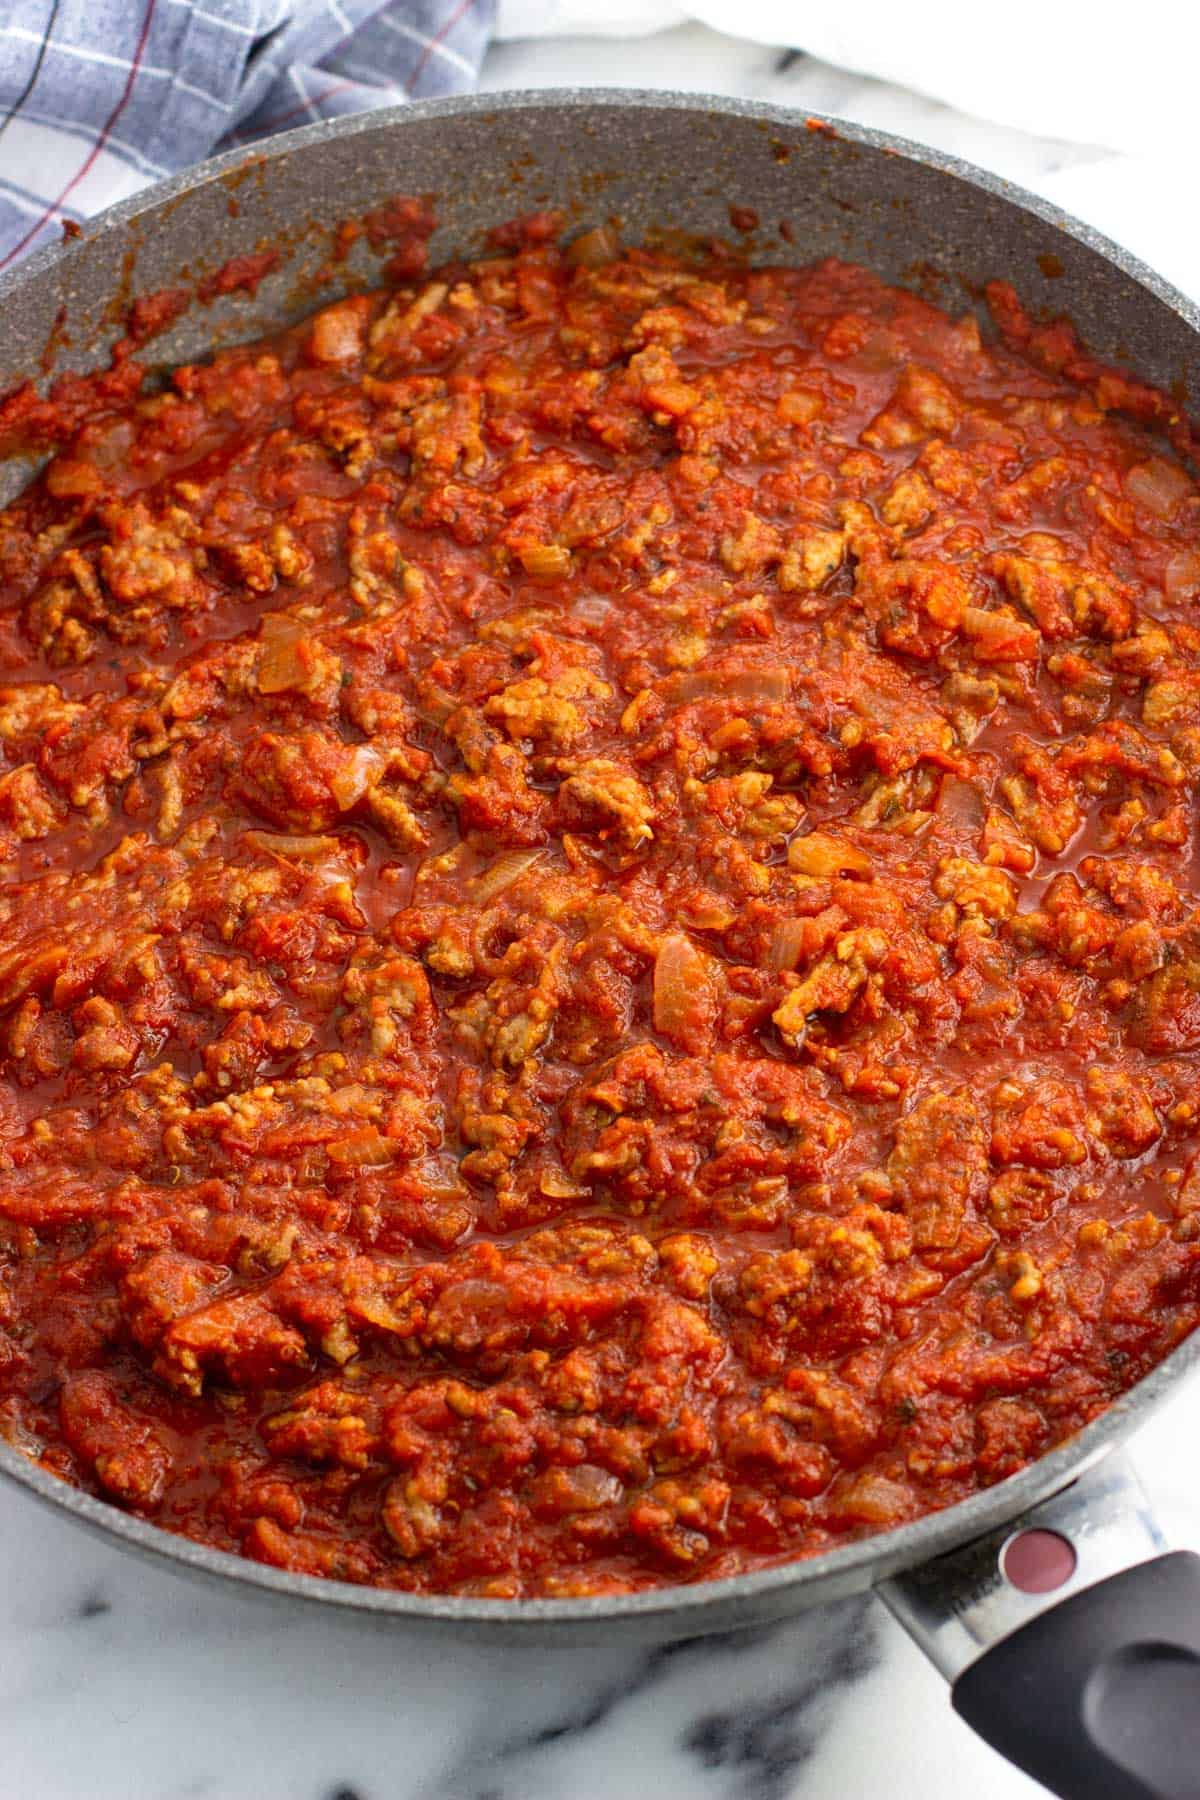 Crushed tomatoes and spices added to the pan to form a sauce.